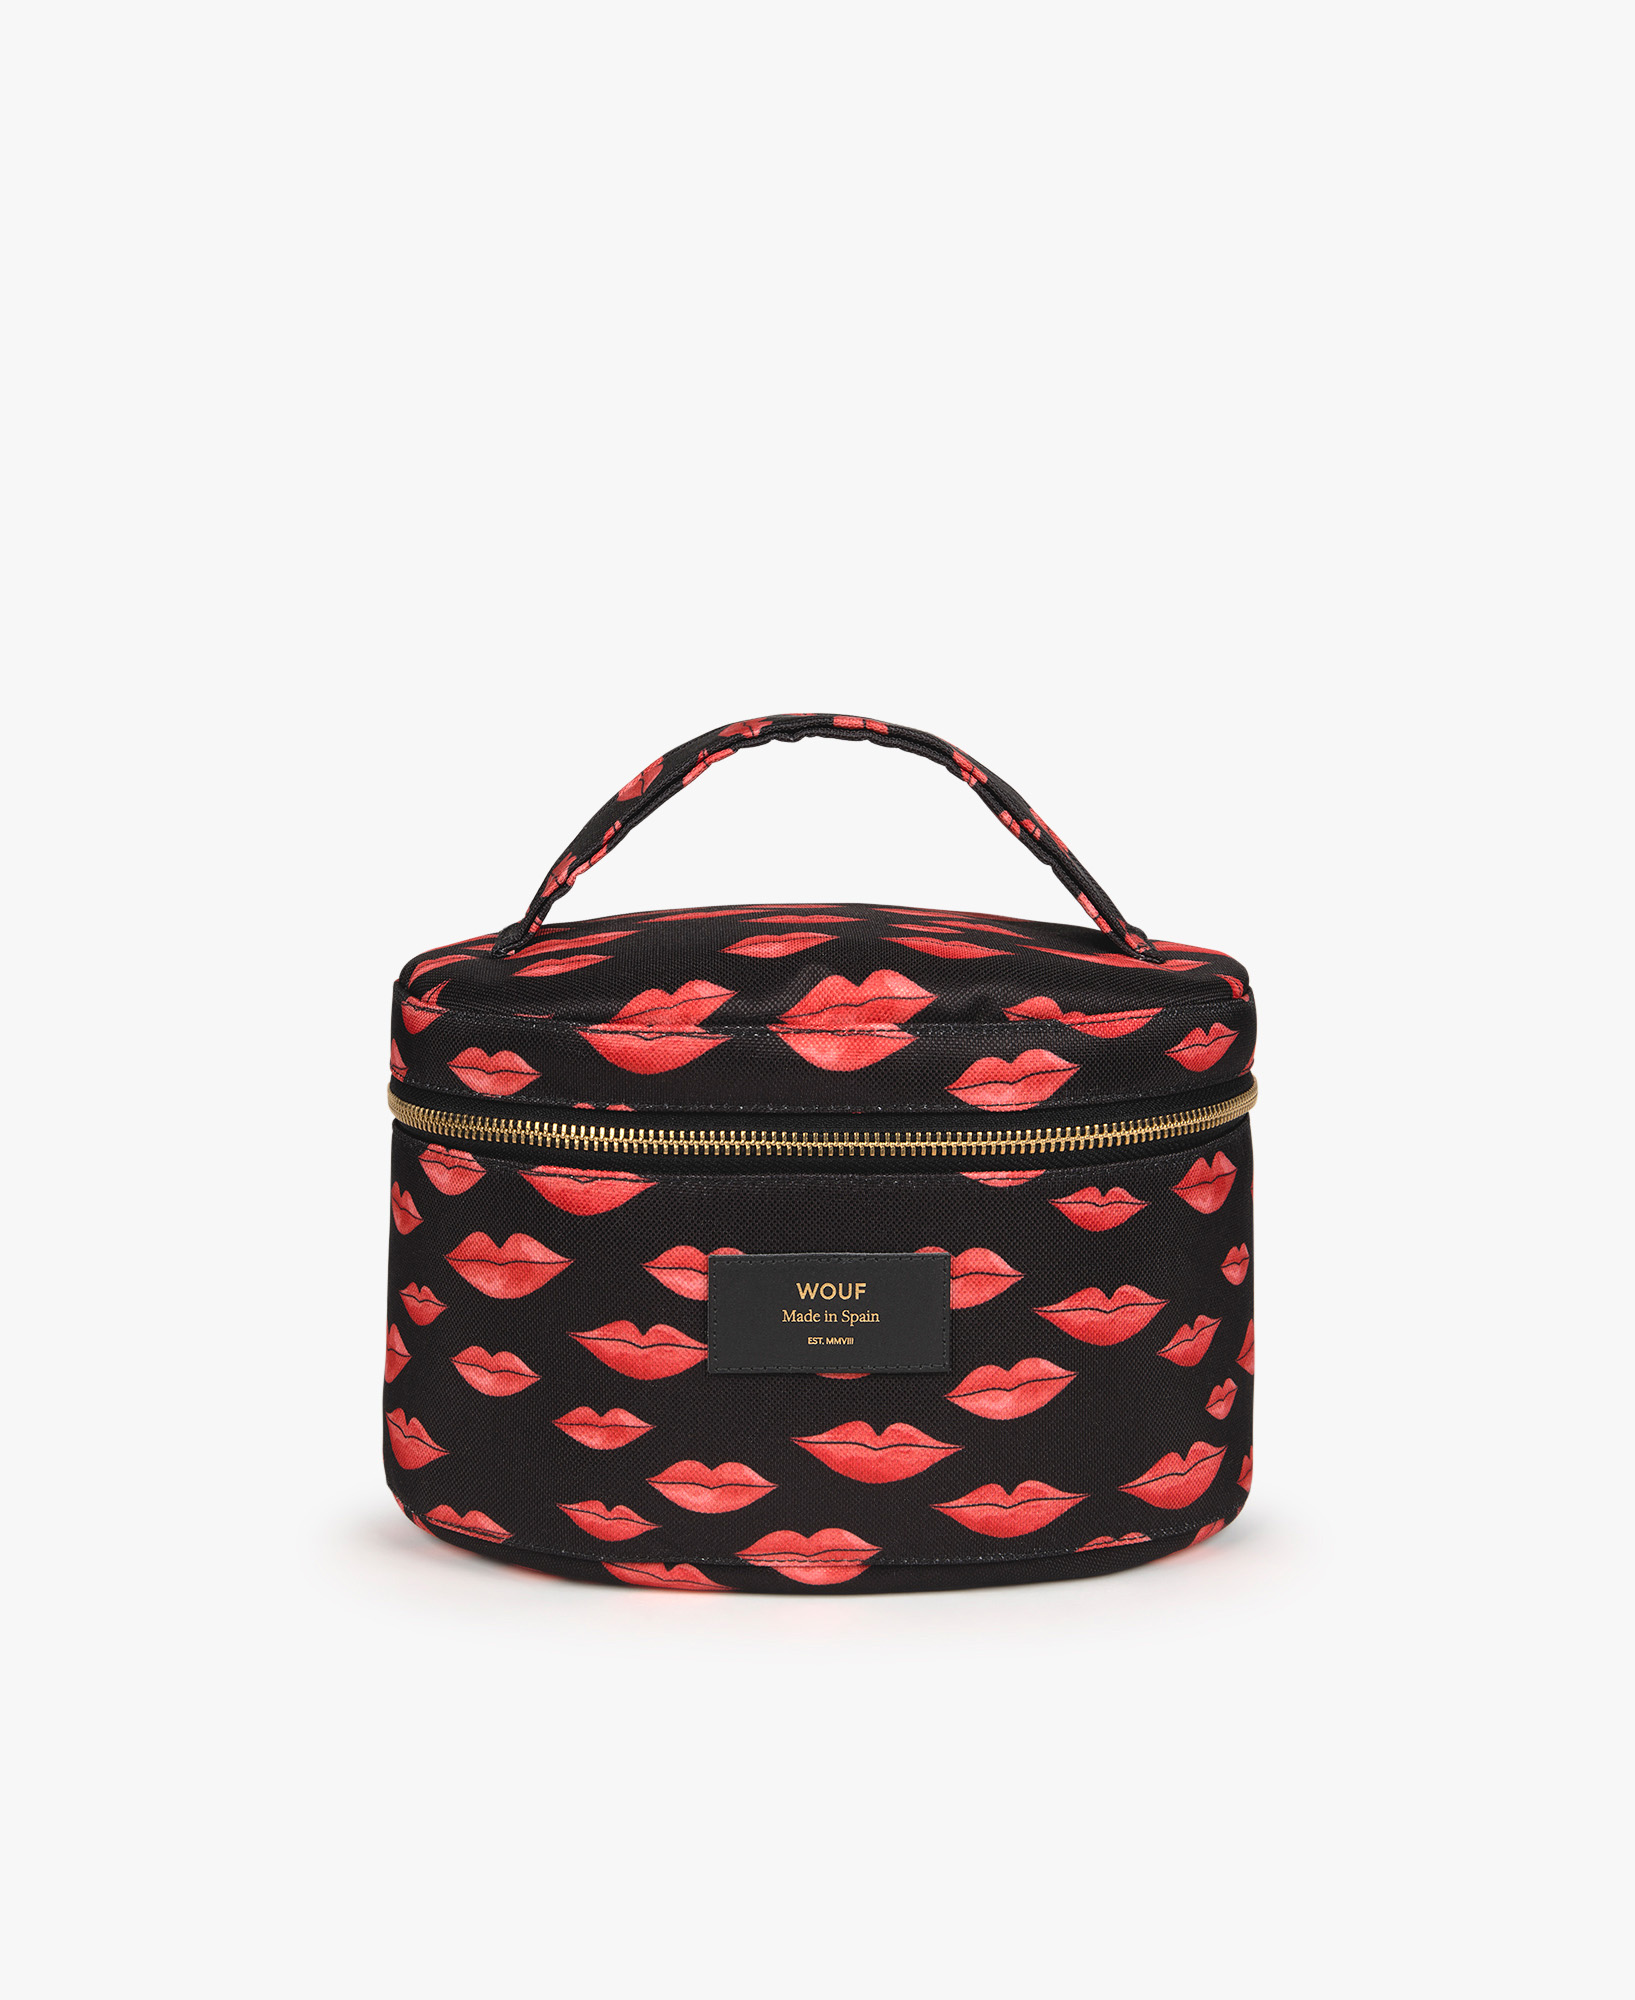 WOUF-XL-Makeup-Bag-Beso-Front